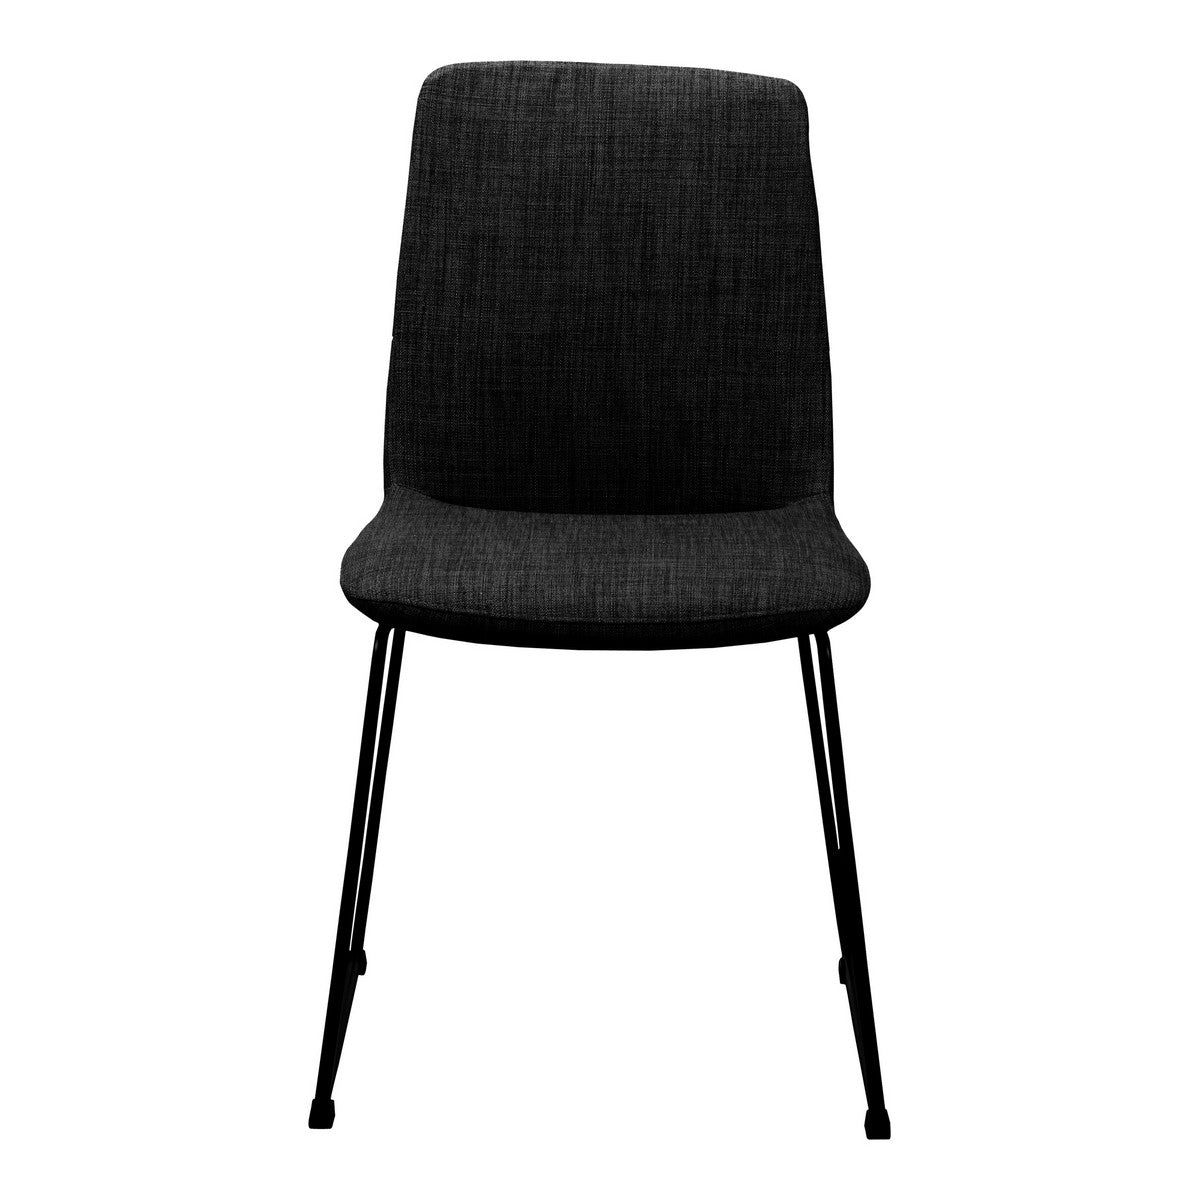 Moe's Home Collection Ruth Dining Chair Black-Set of Two - EJ-1007-02